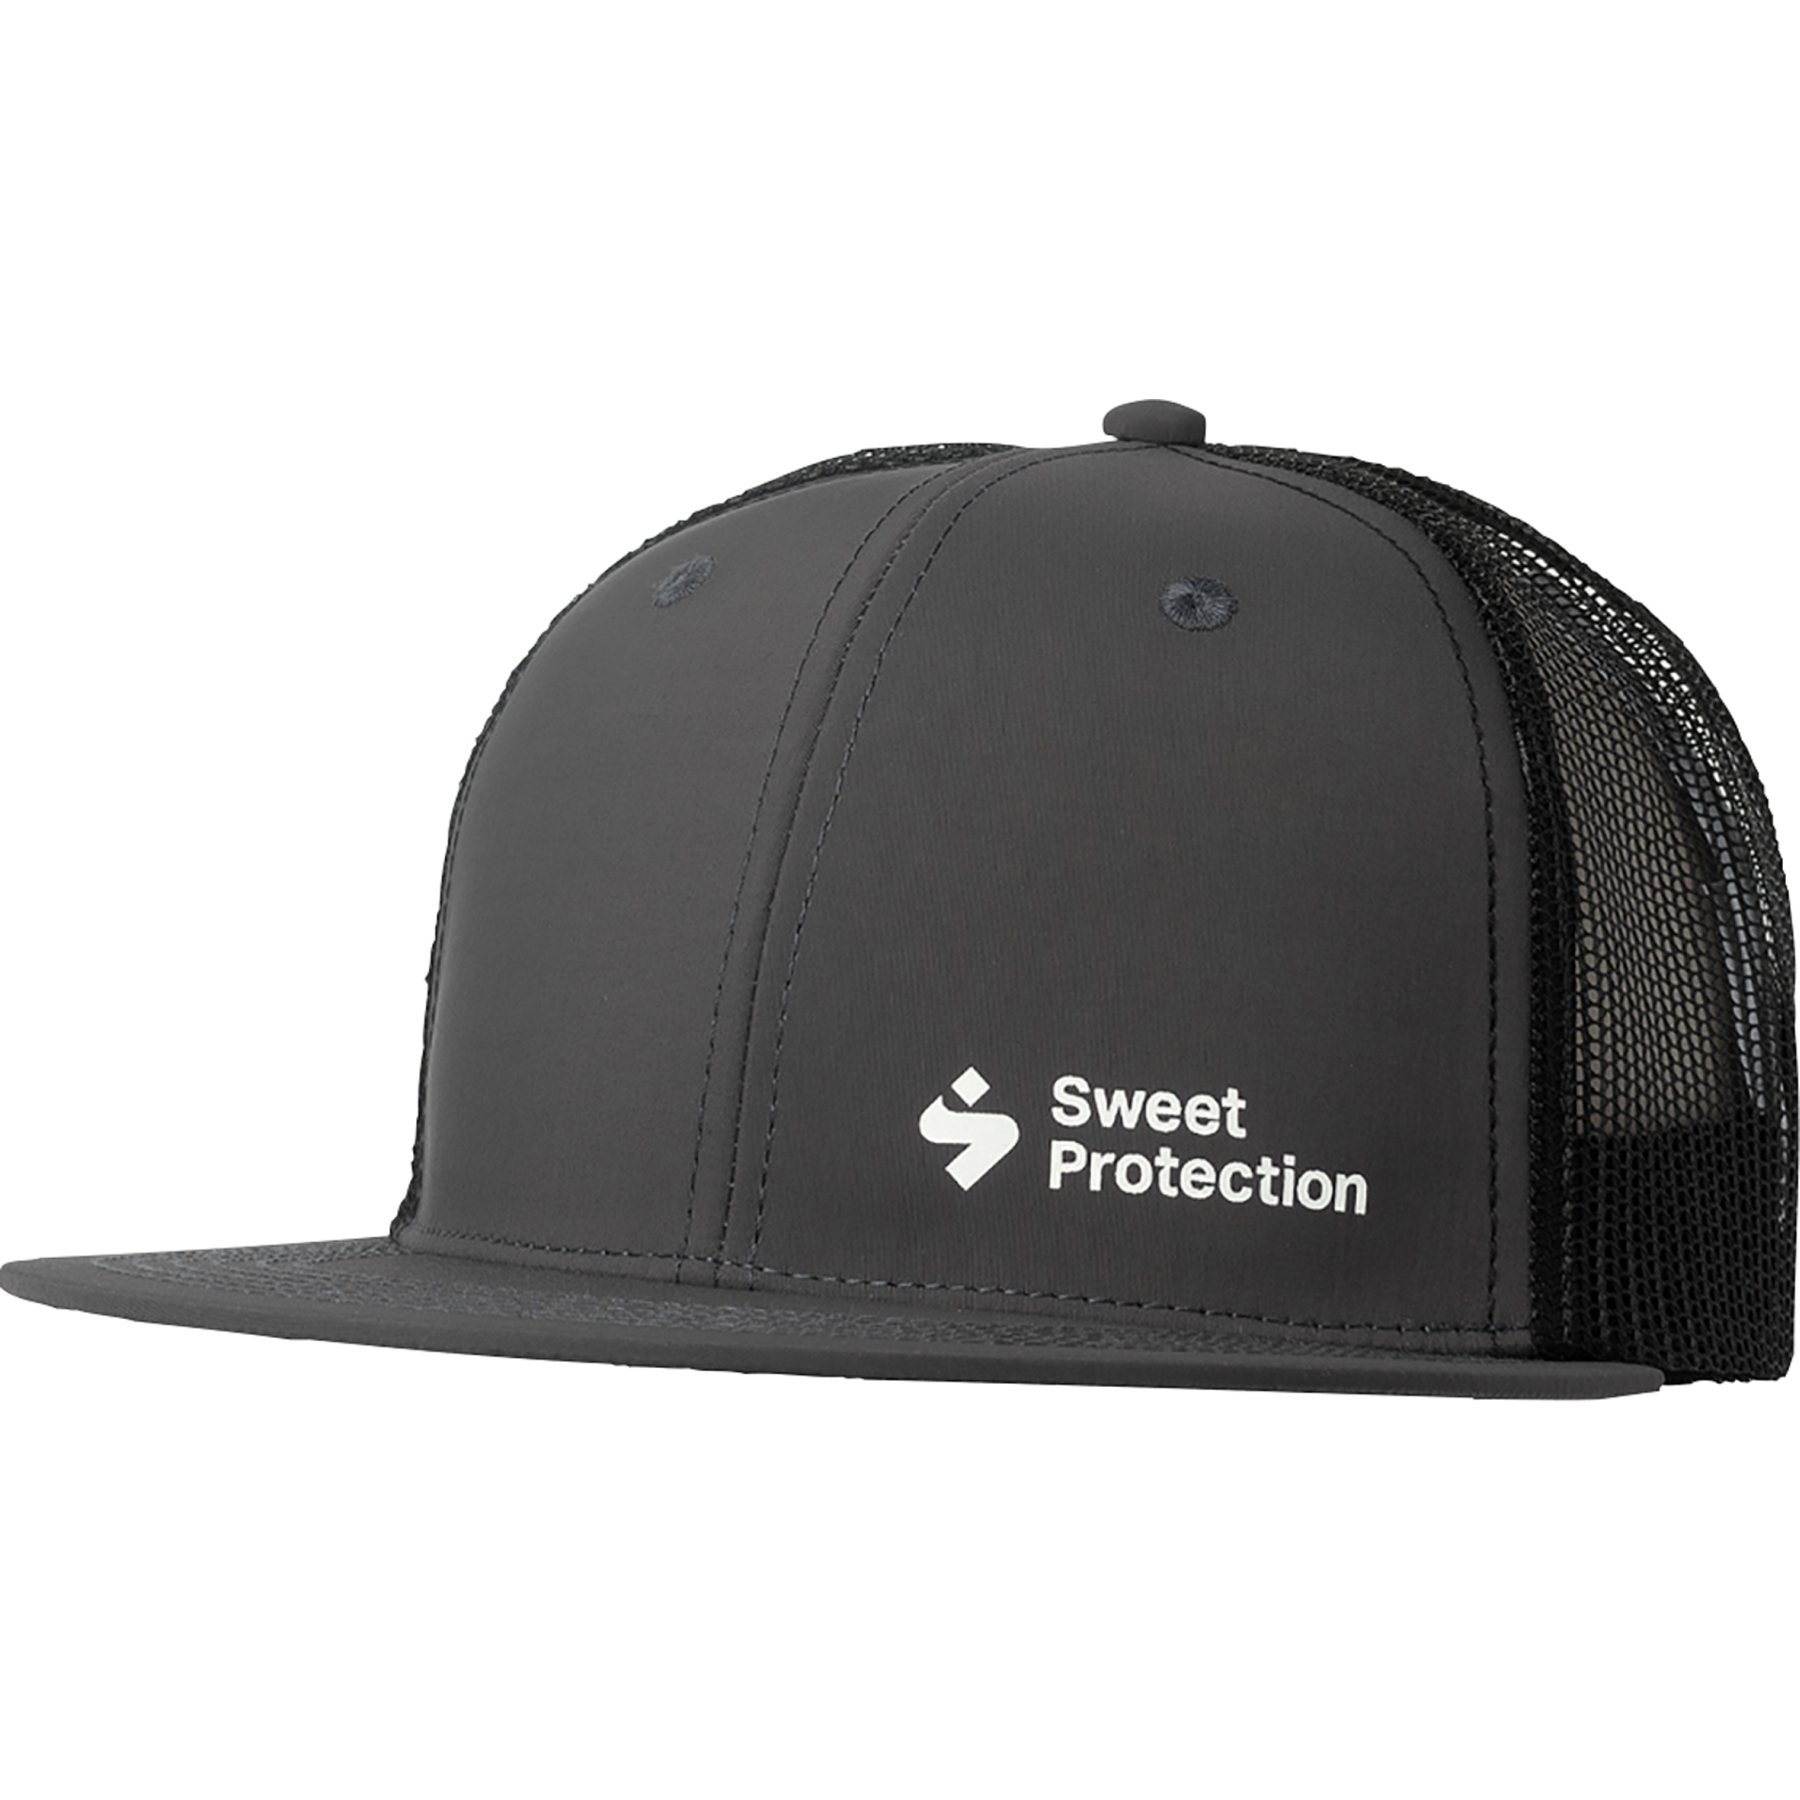 Image of SWEET Protection Corporate Trucker Cap - Stone Gray